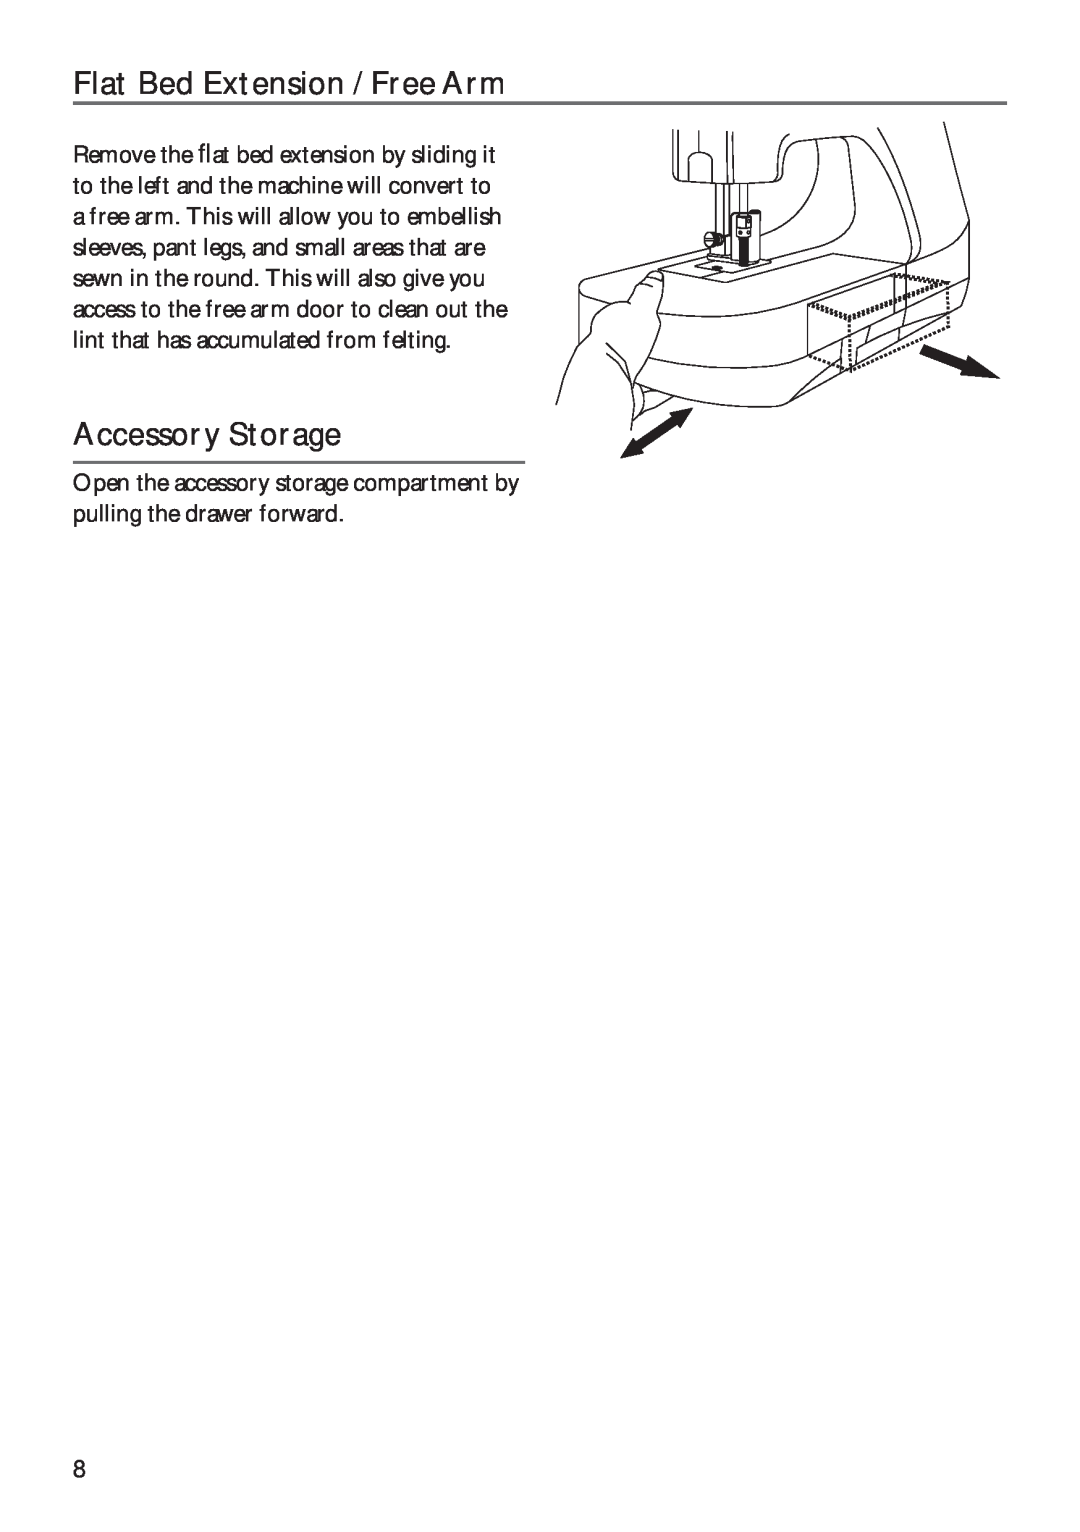 Pfaff 350P owner manual Flat Bed Extension / Free Arm, Accessory Storage 